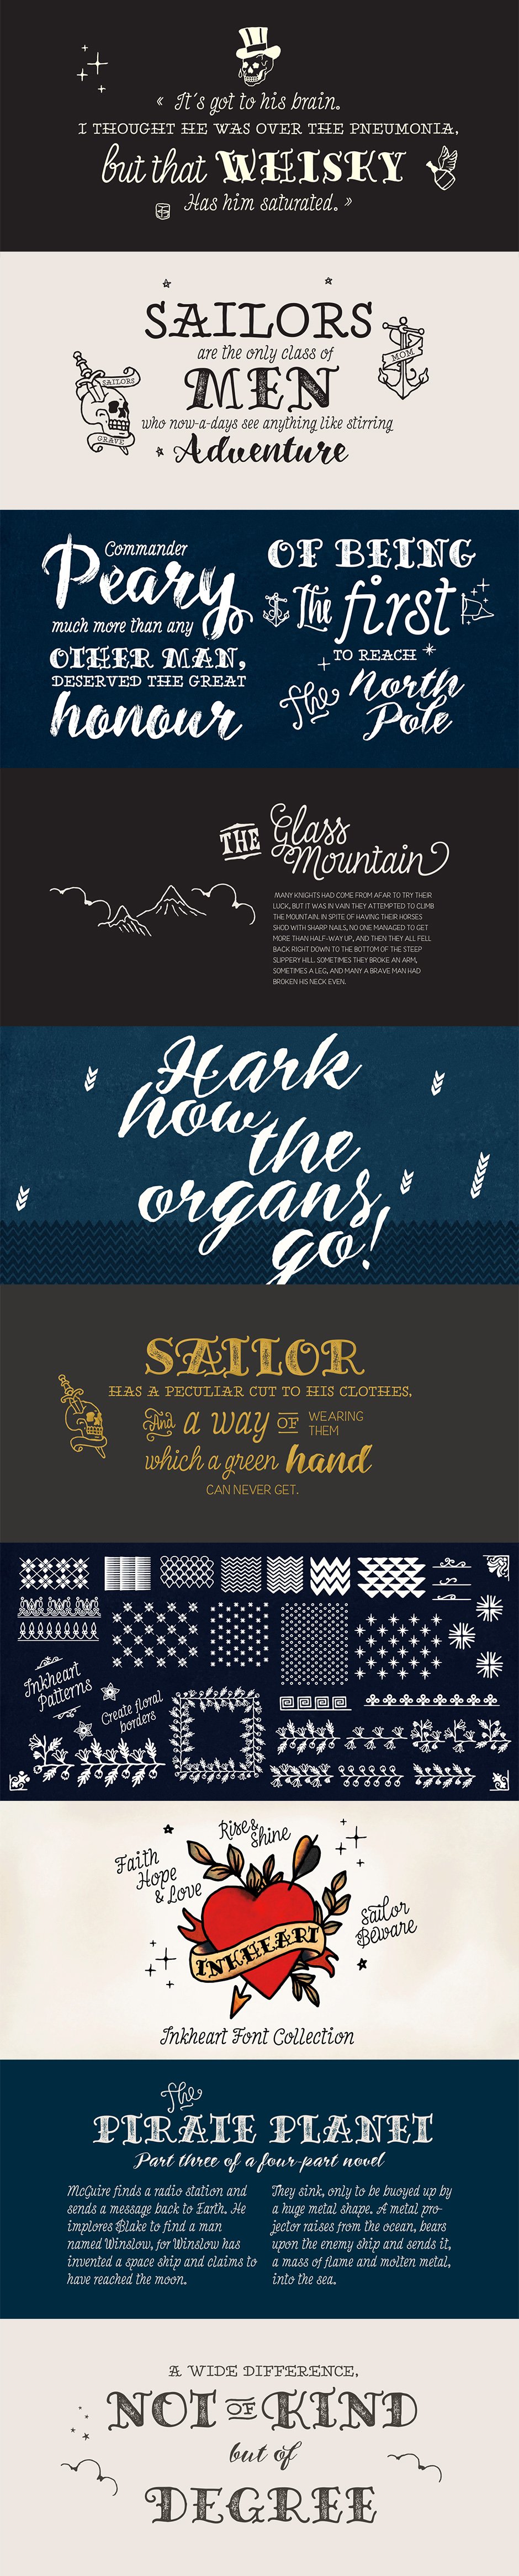 20 Best-Selling Font Families